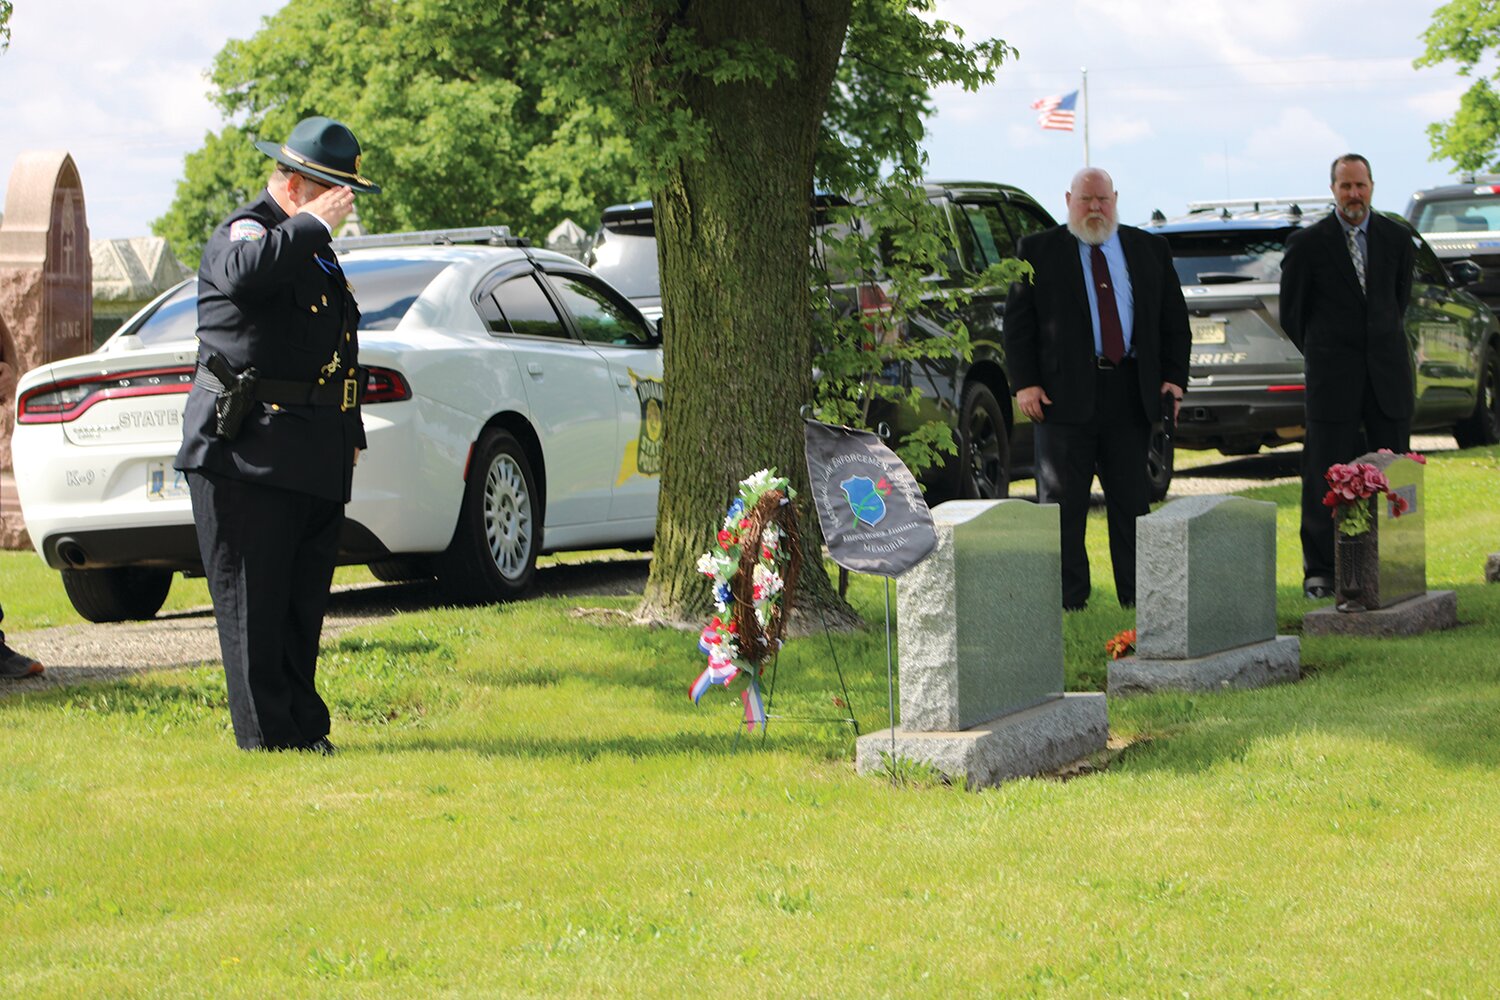 Aaron Clapp salutes at his father's grave.